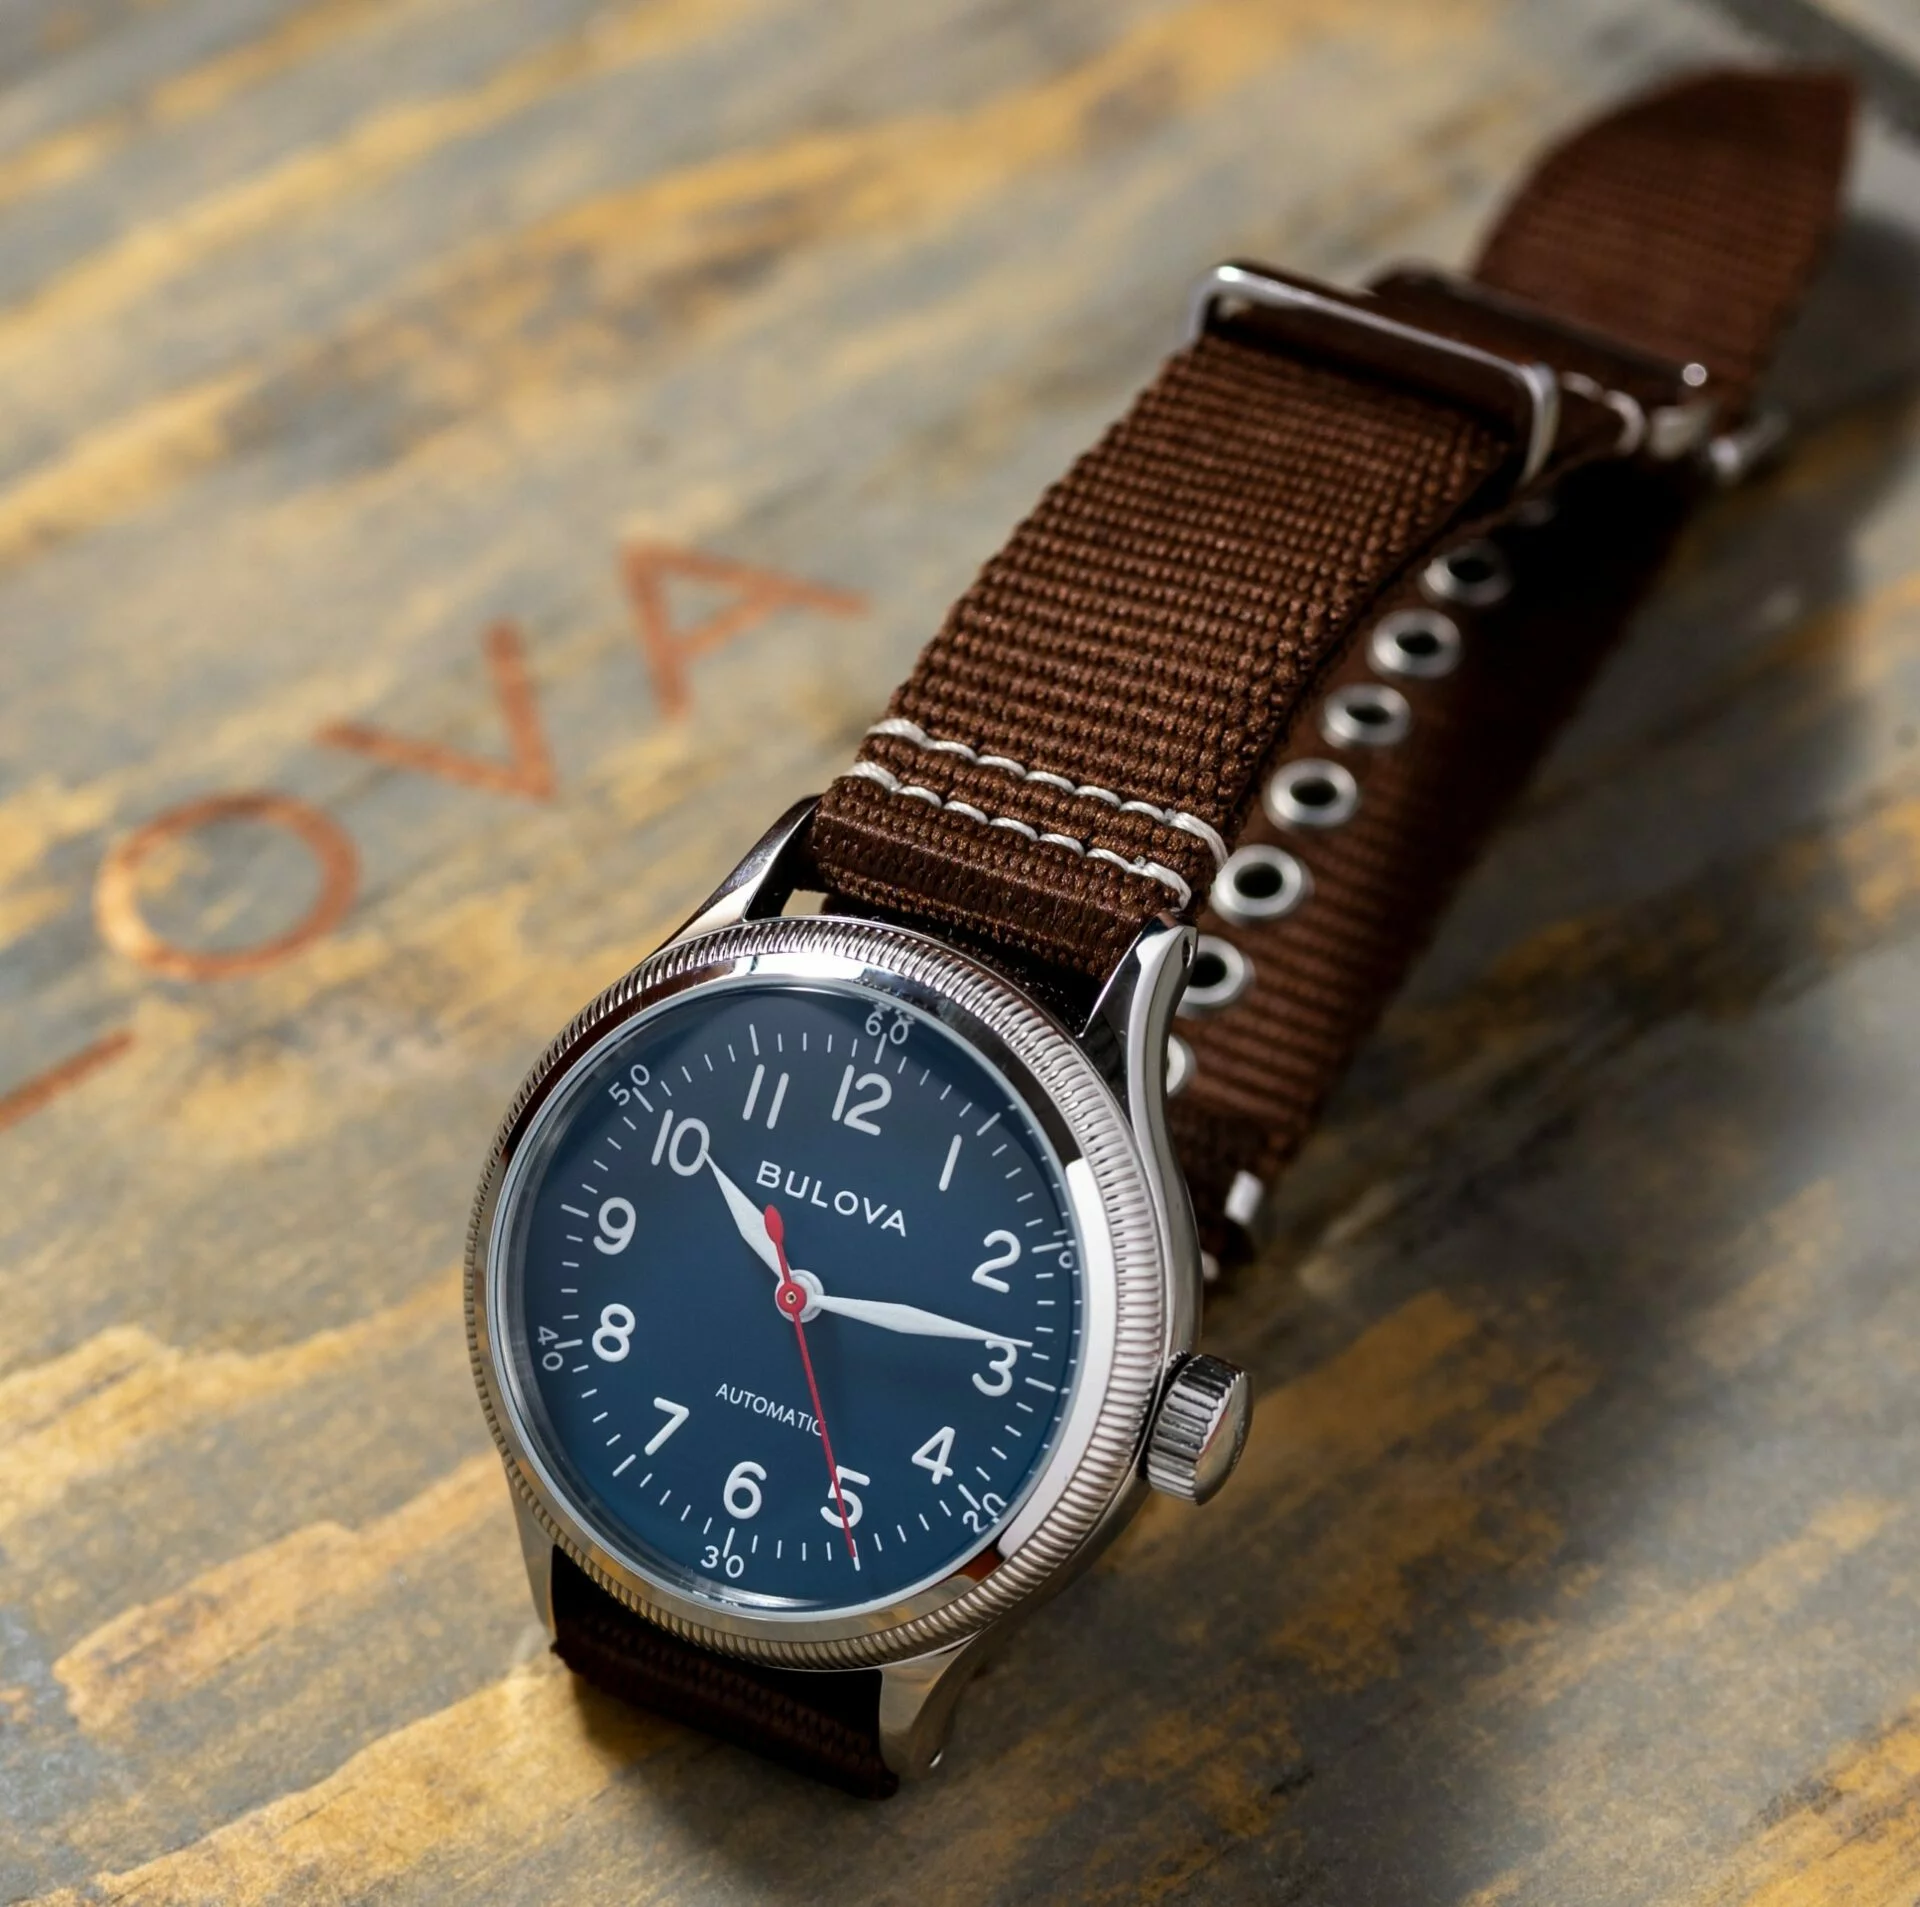 HANDS-ON: The Bulova Classic HACK Military